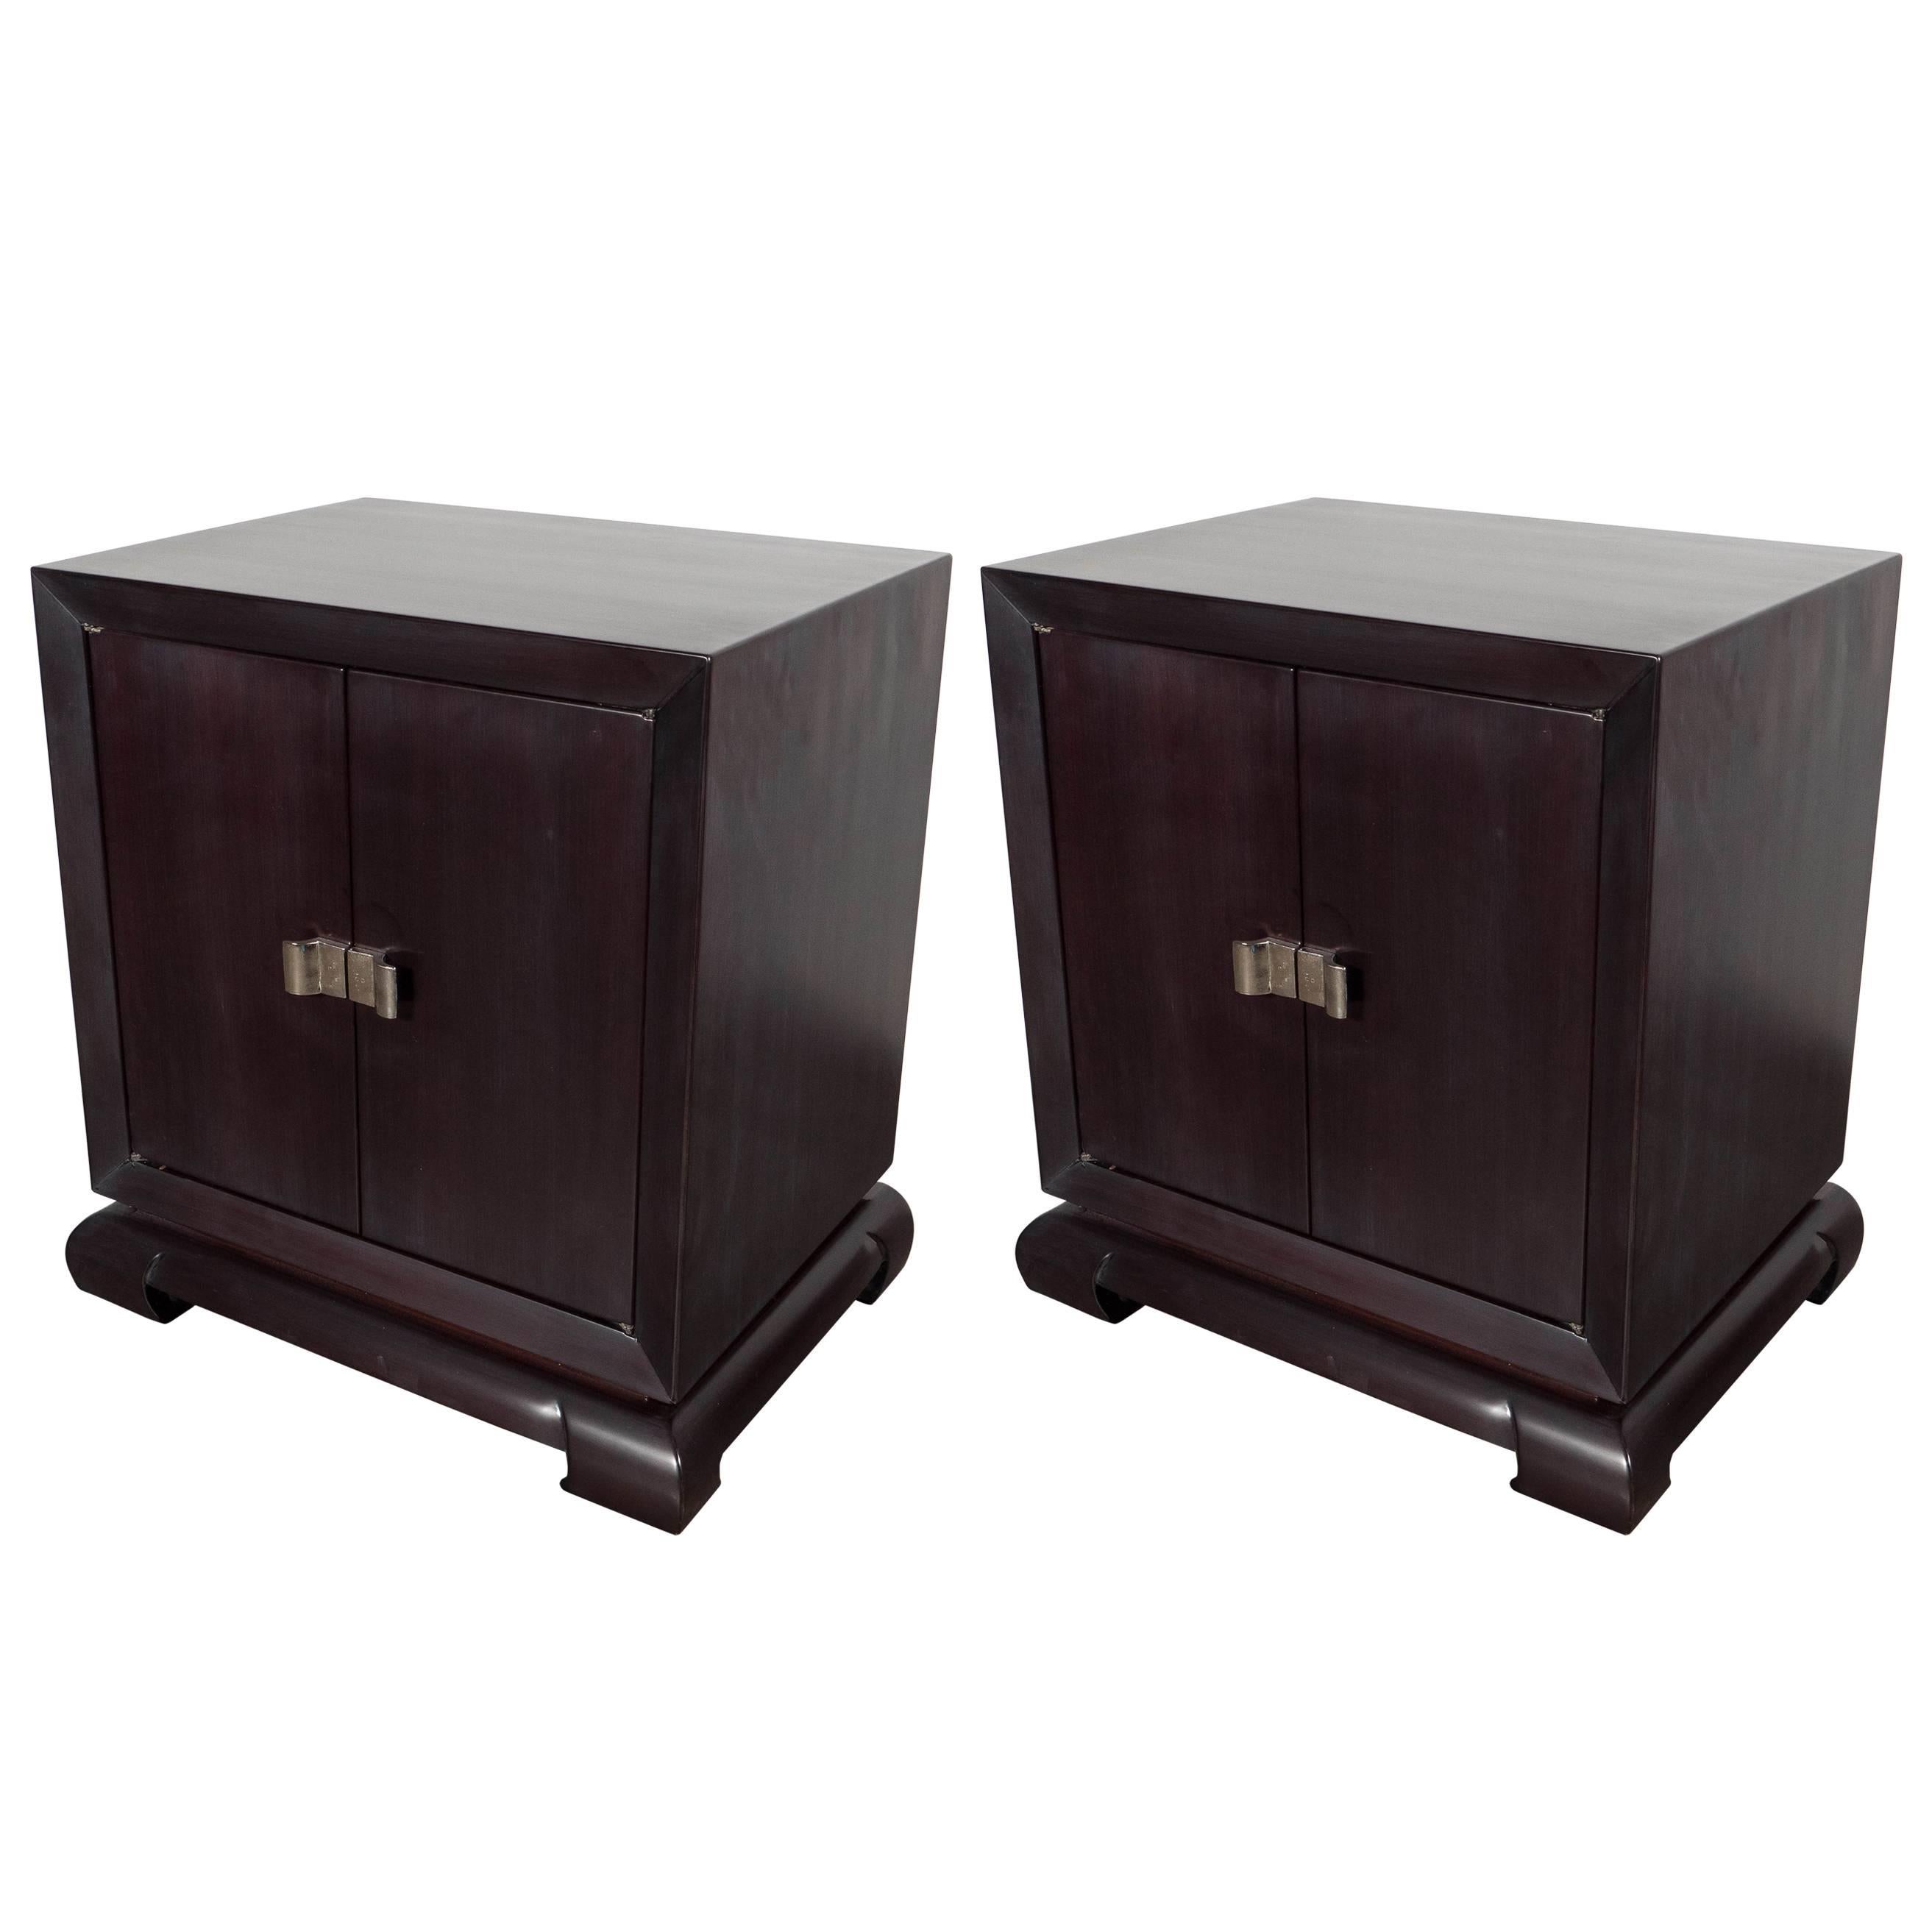 Pair of Mid-Century Modernist Nightstands in the Manner of James Mont